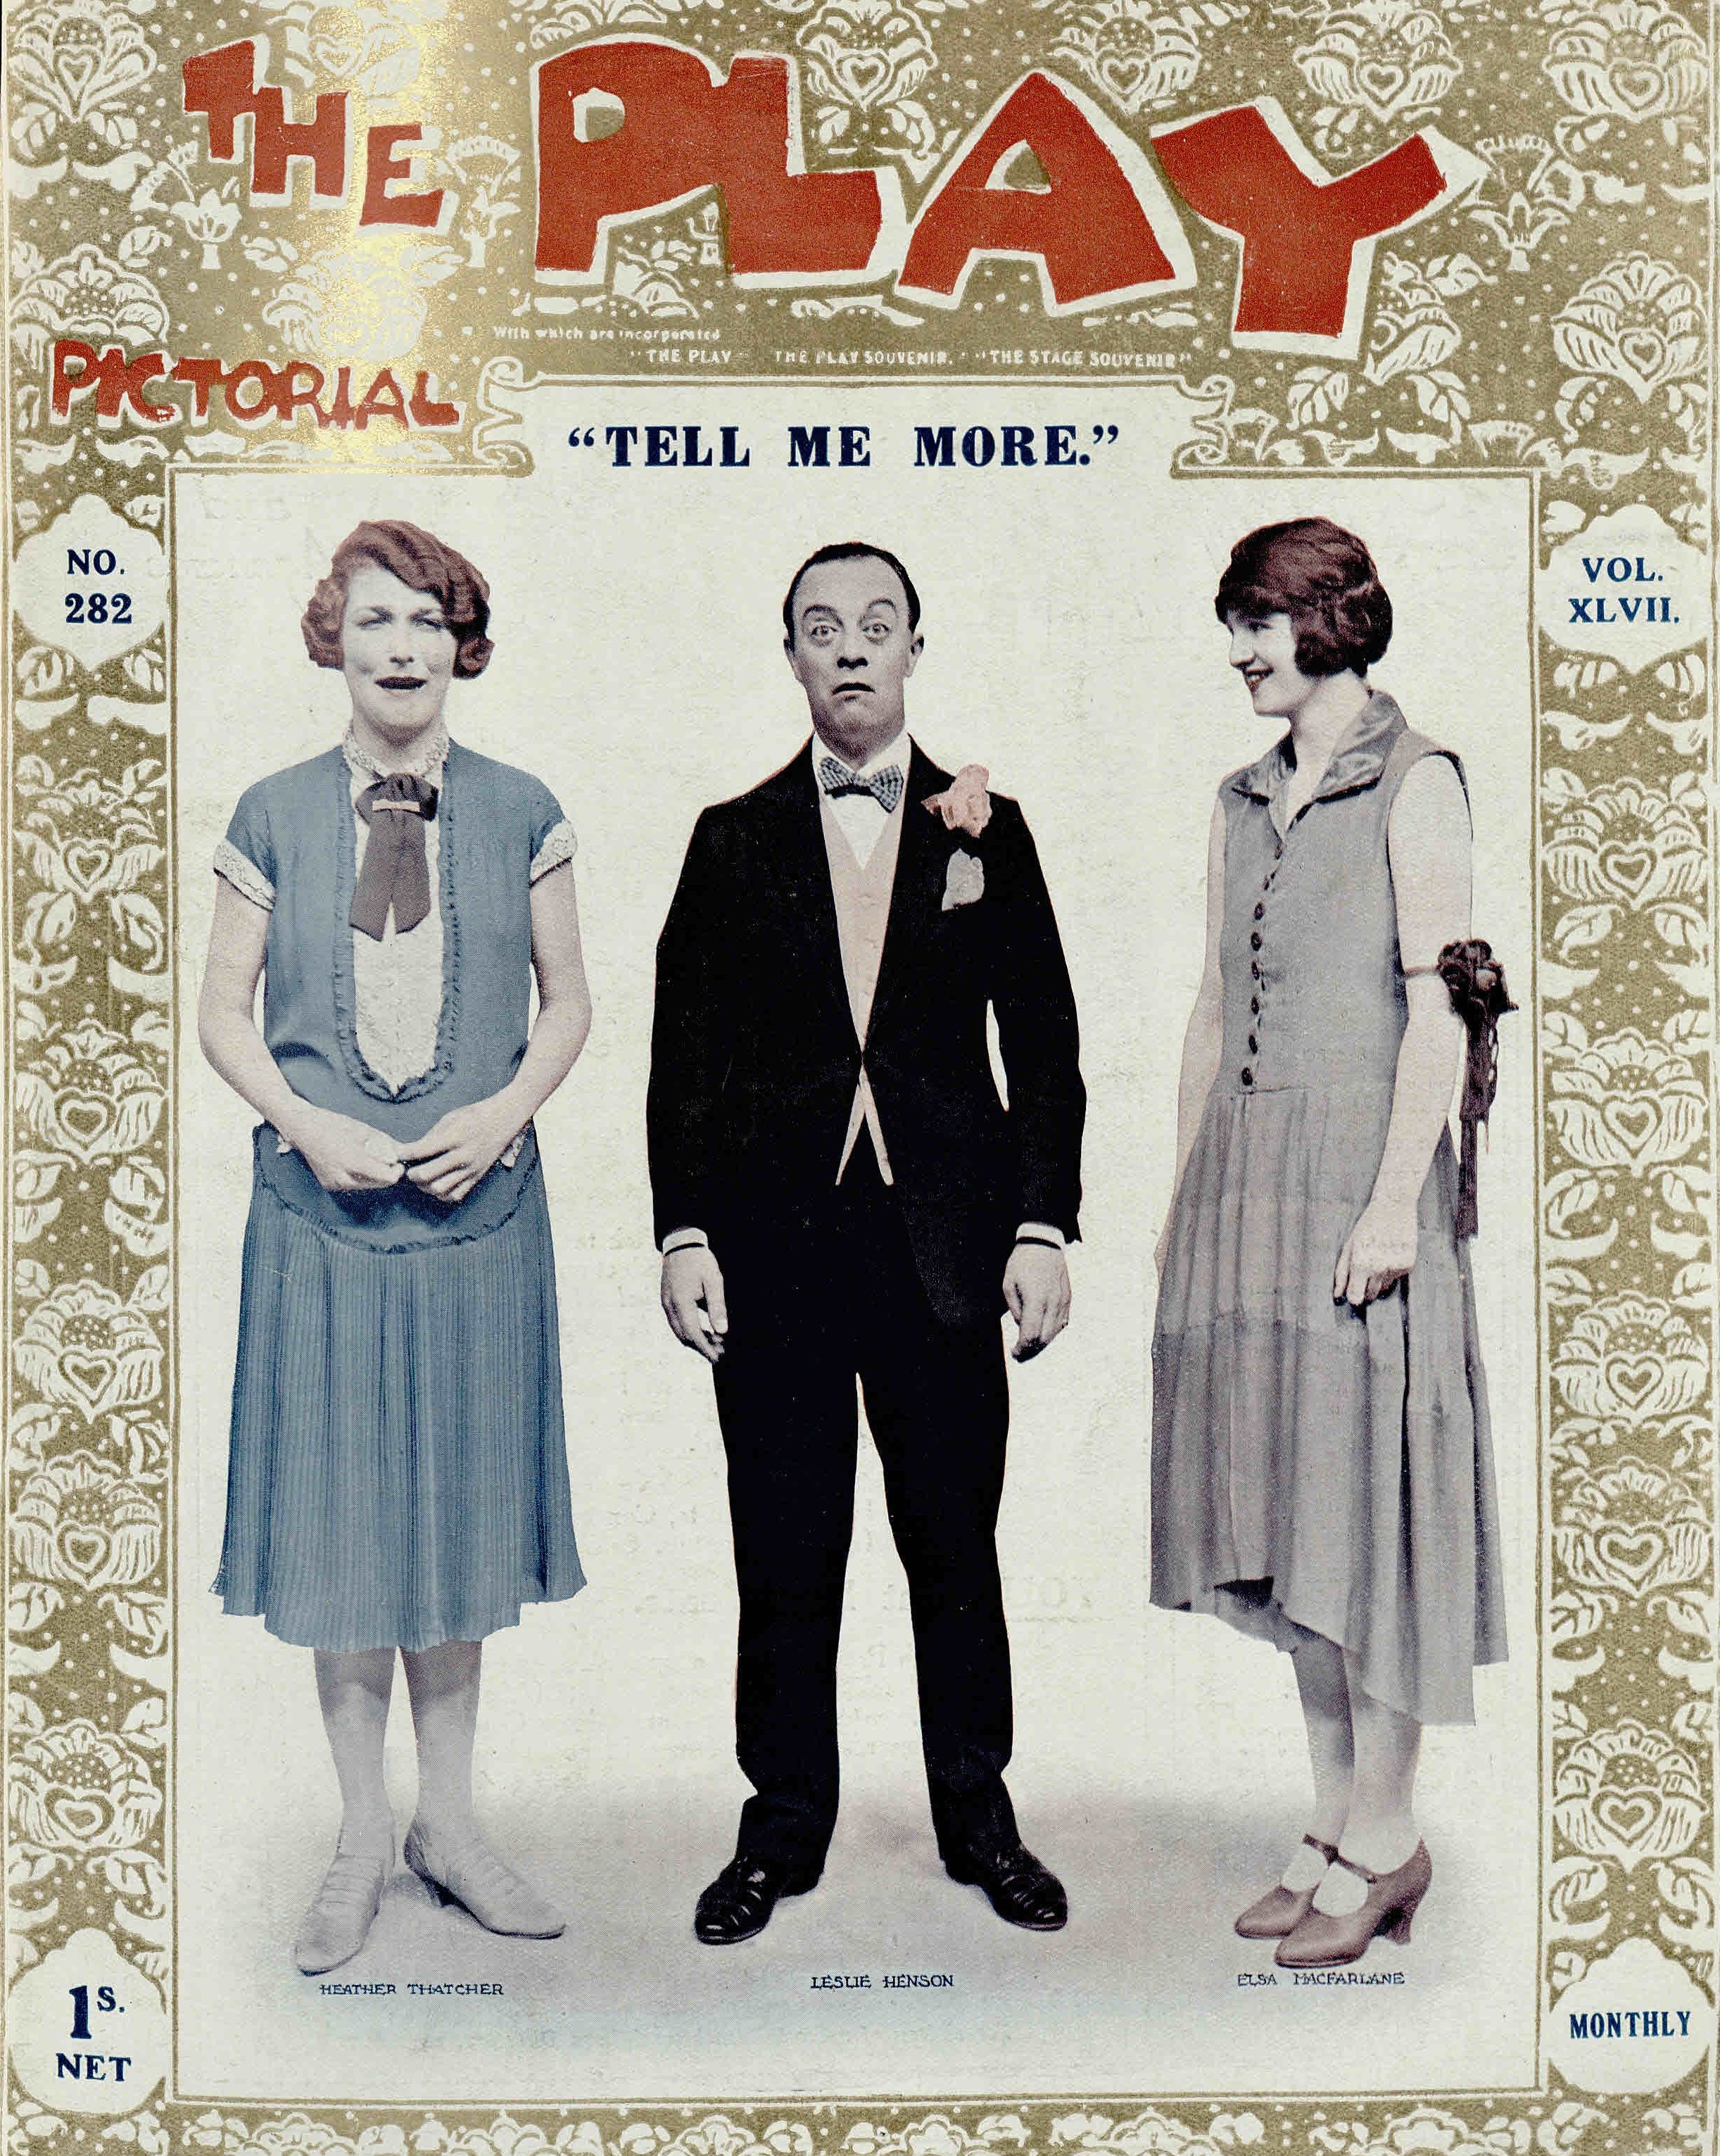 Front cover of Play Pictorial, featuring Tell Me More